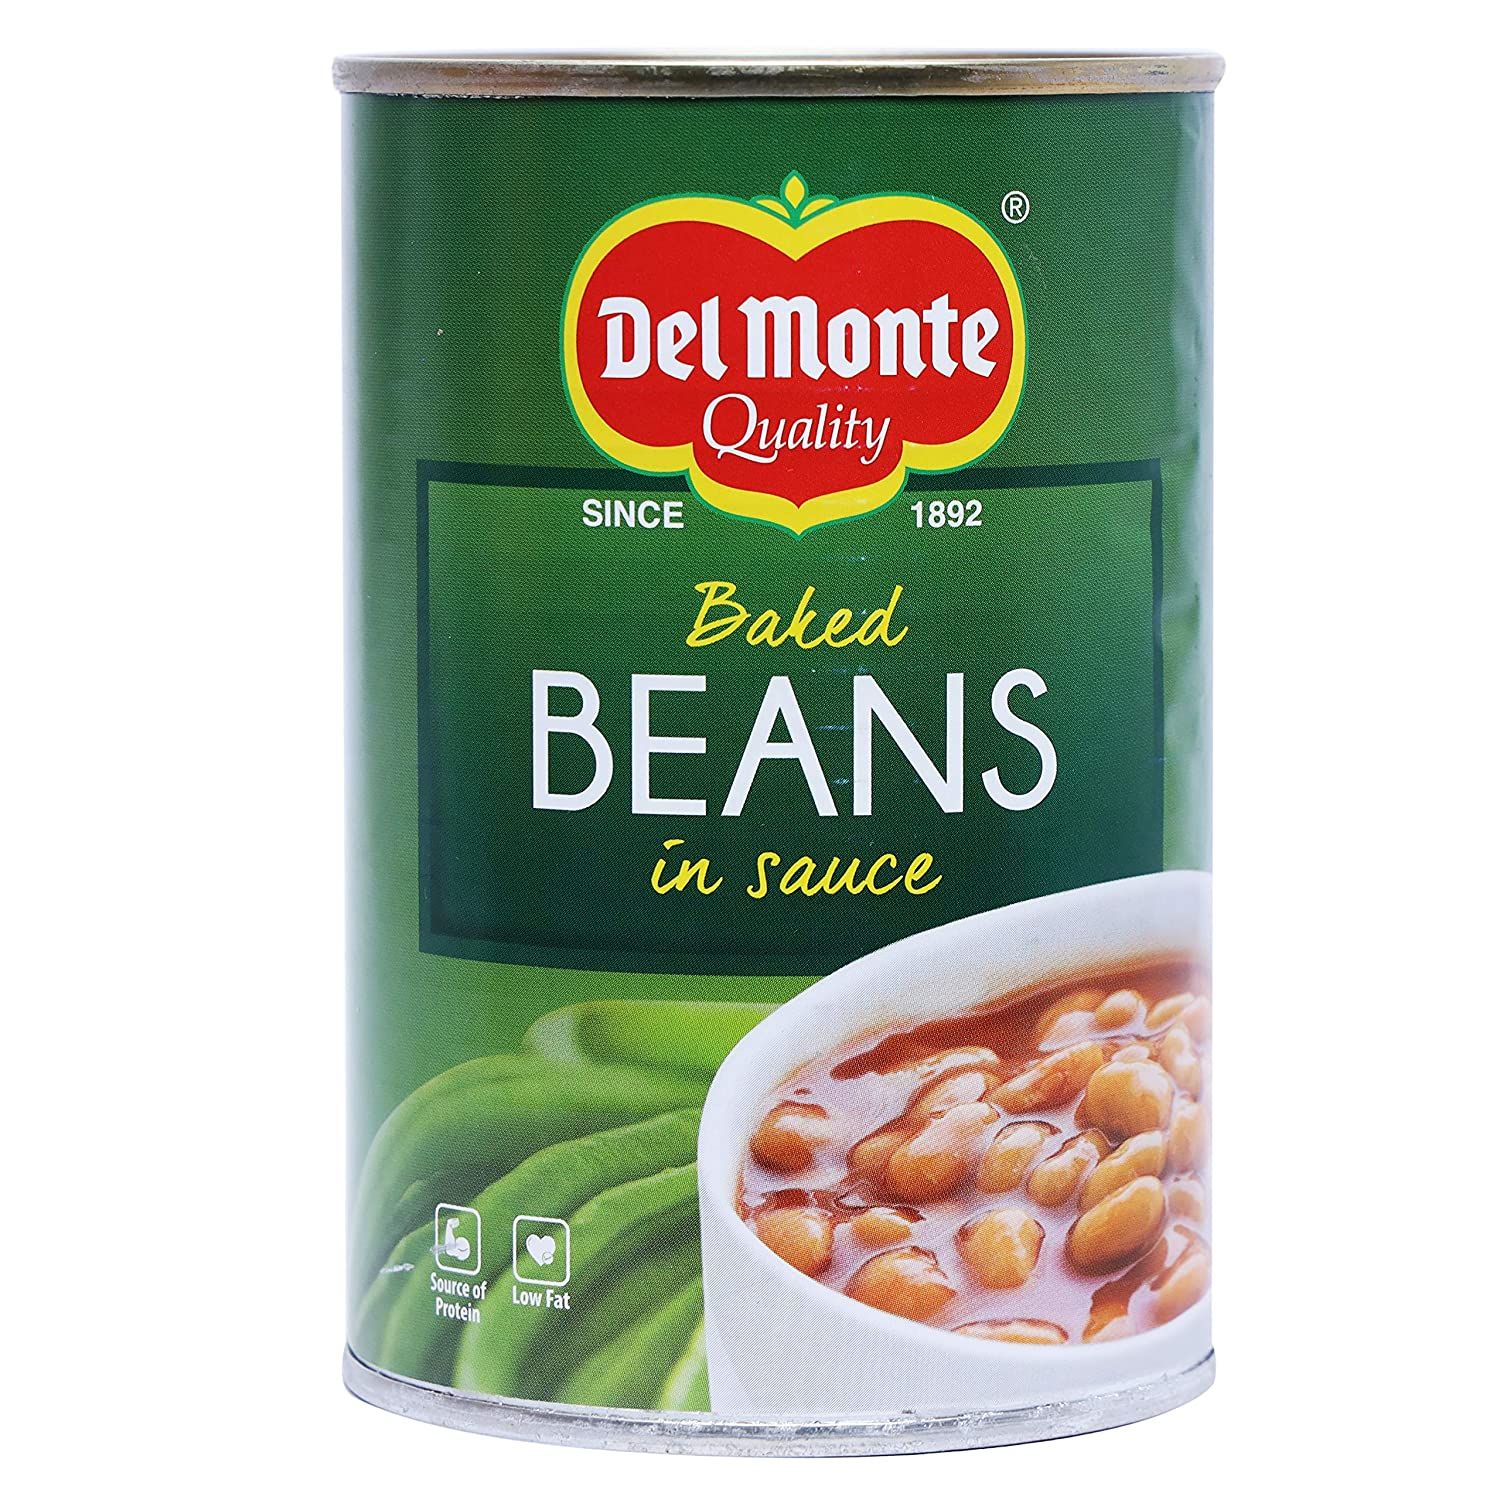 Del Monte Baked Beans Image